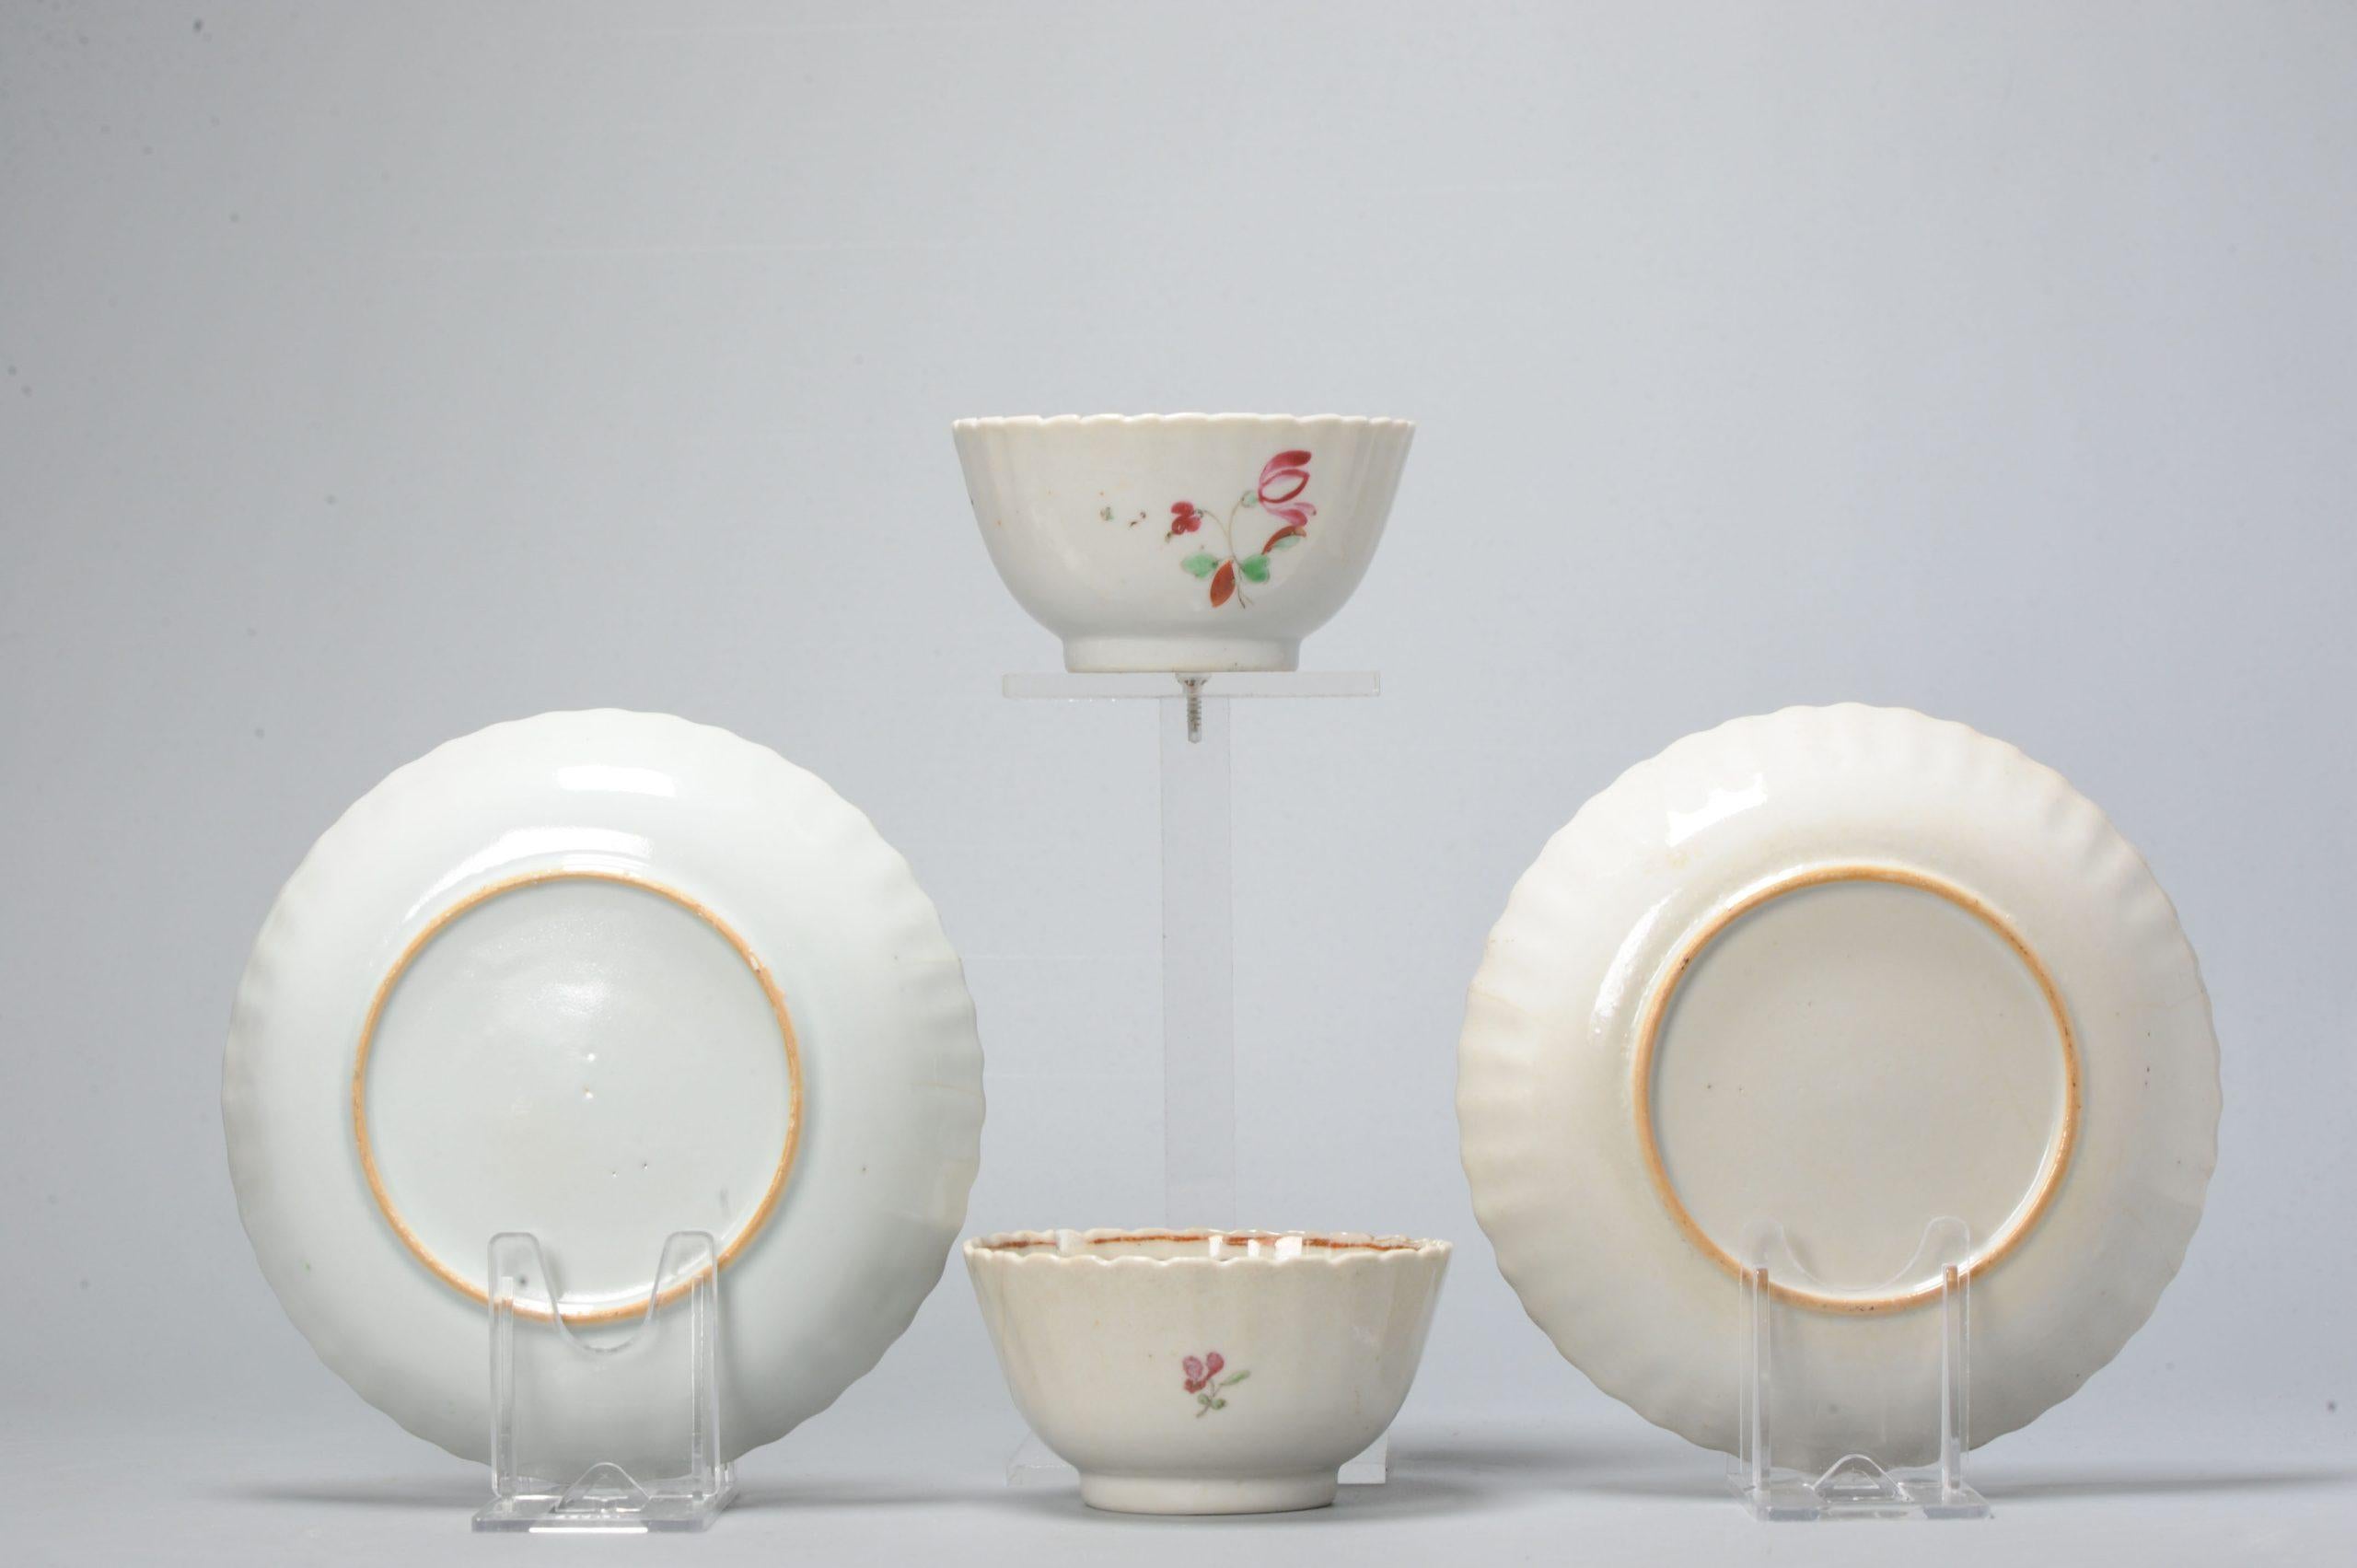 Set of 6 Antique Chinese Porcelain Tea Chine de Commande Qianlong Period, 18thC  In Good Condition For Sale In Amsterdam, Noord Holland